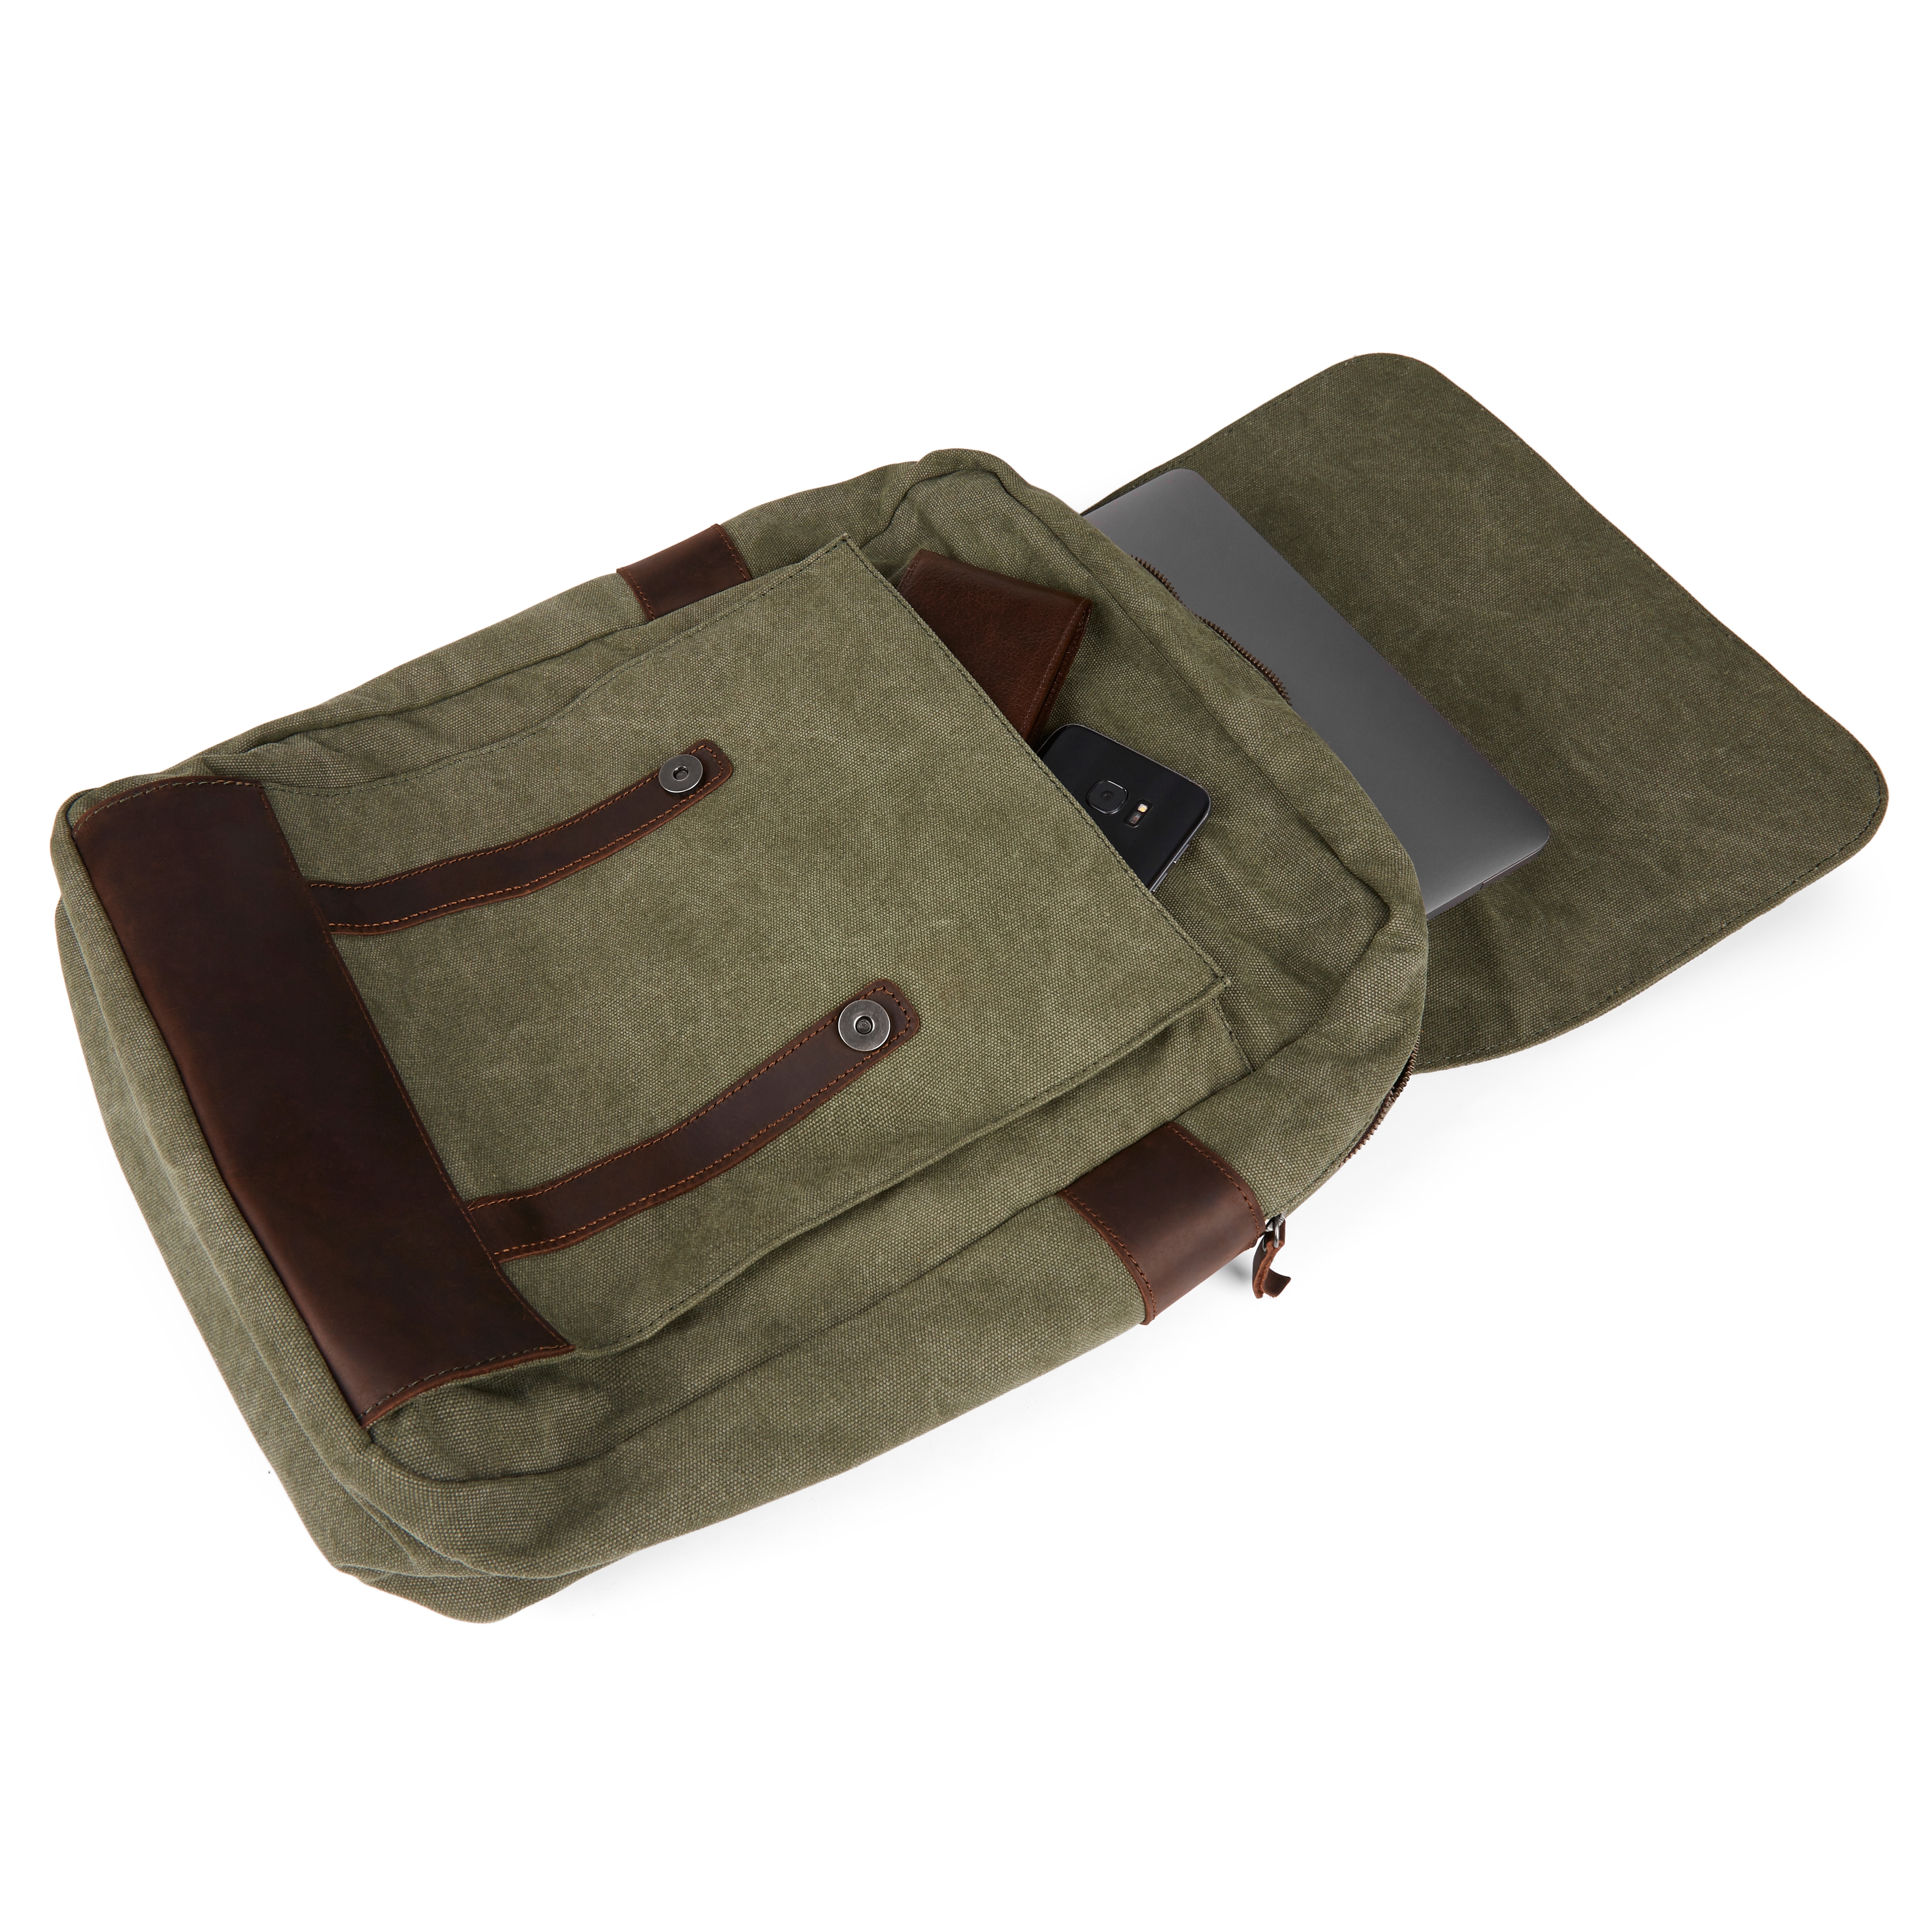 Tarpa, Classic Graphite Canvas & Tan Leather Backpack, In stock!